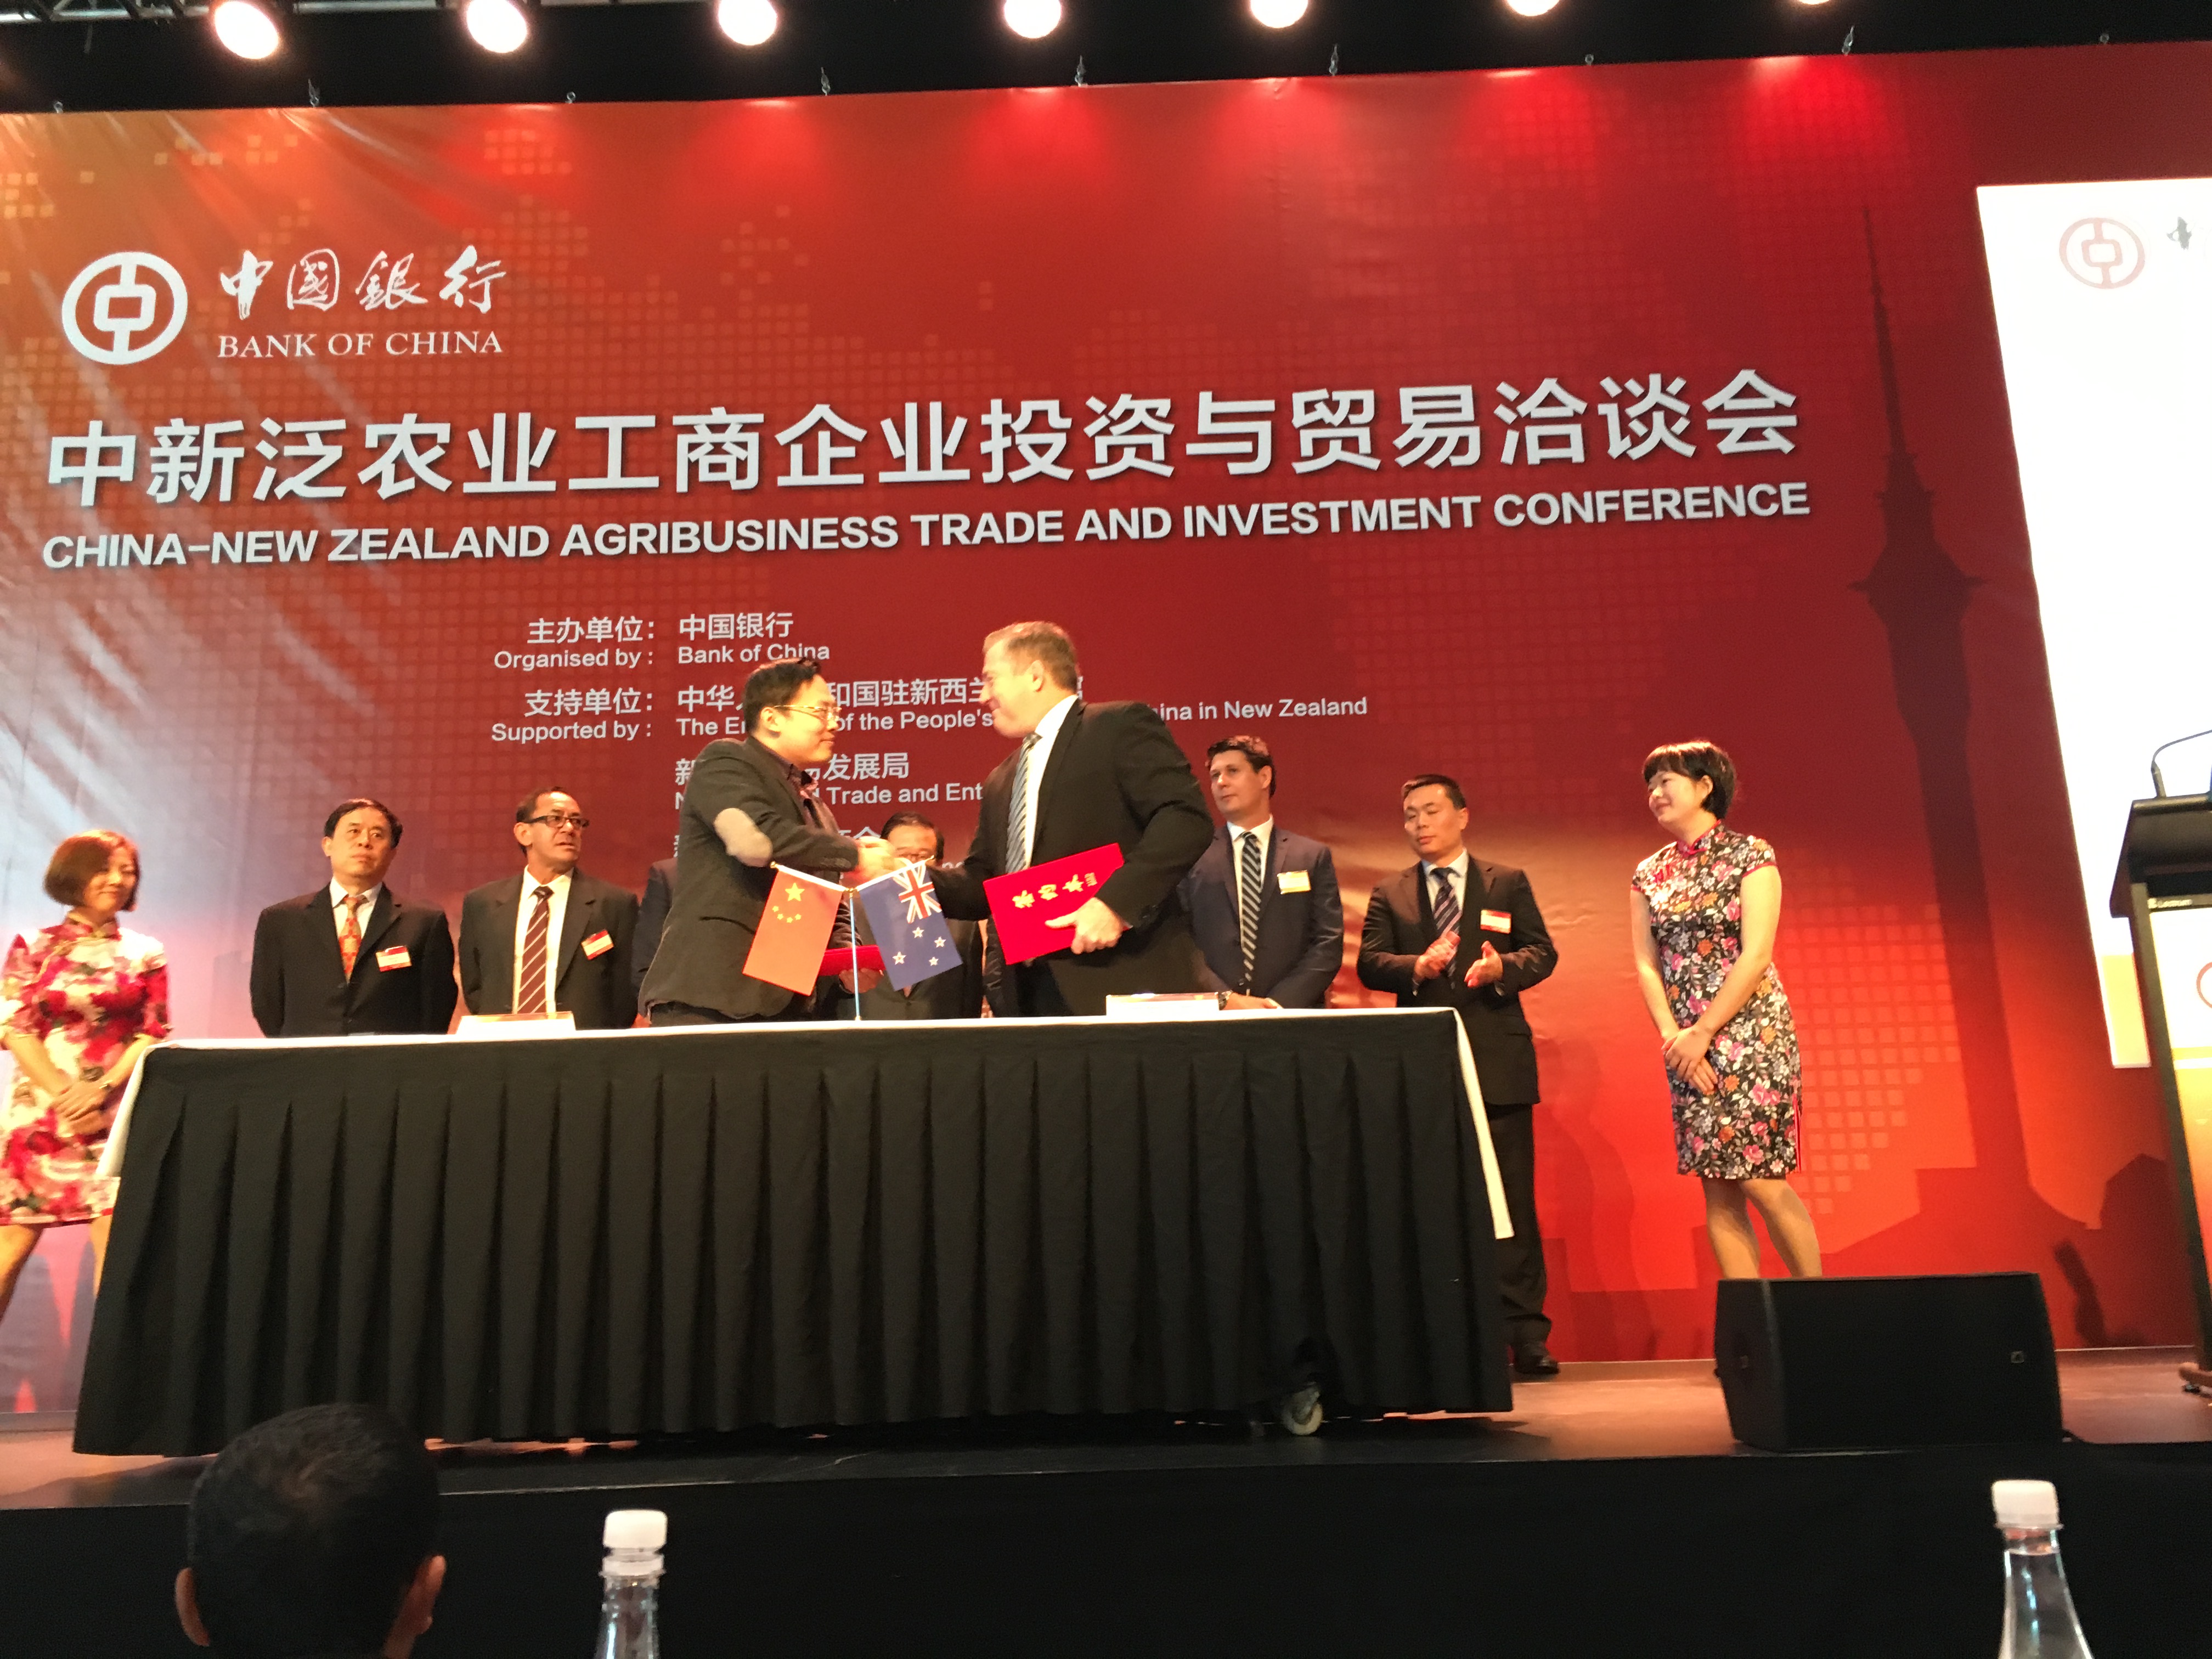 China-New Zealand Agribusiness Trade and Investment Conference